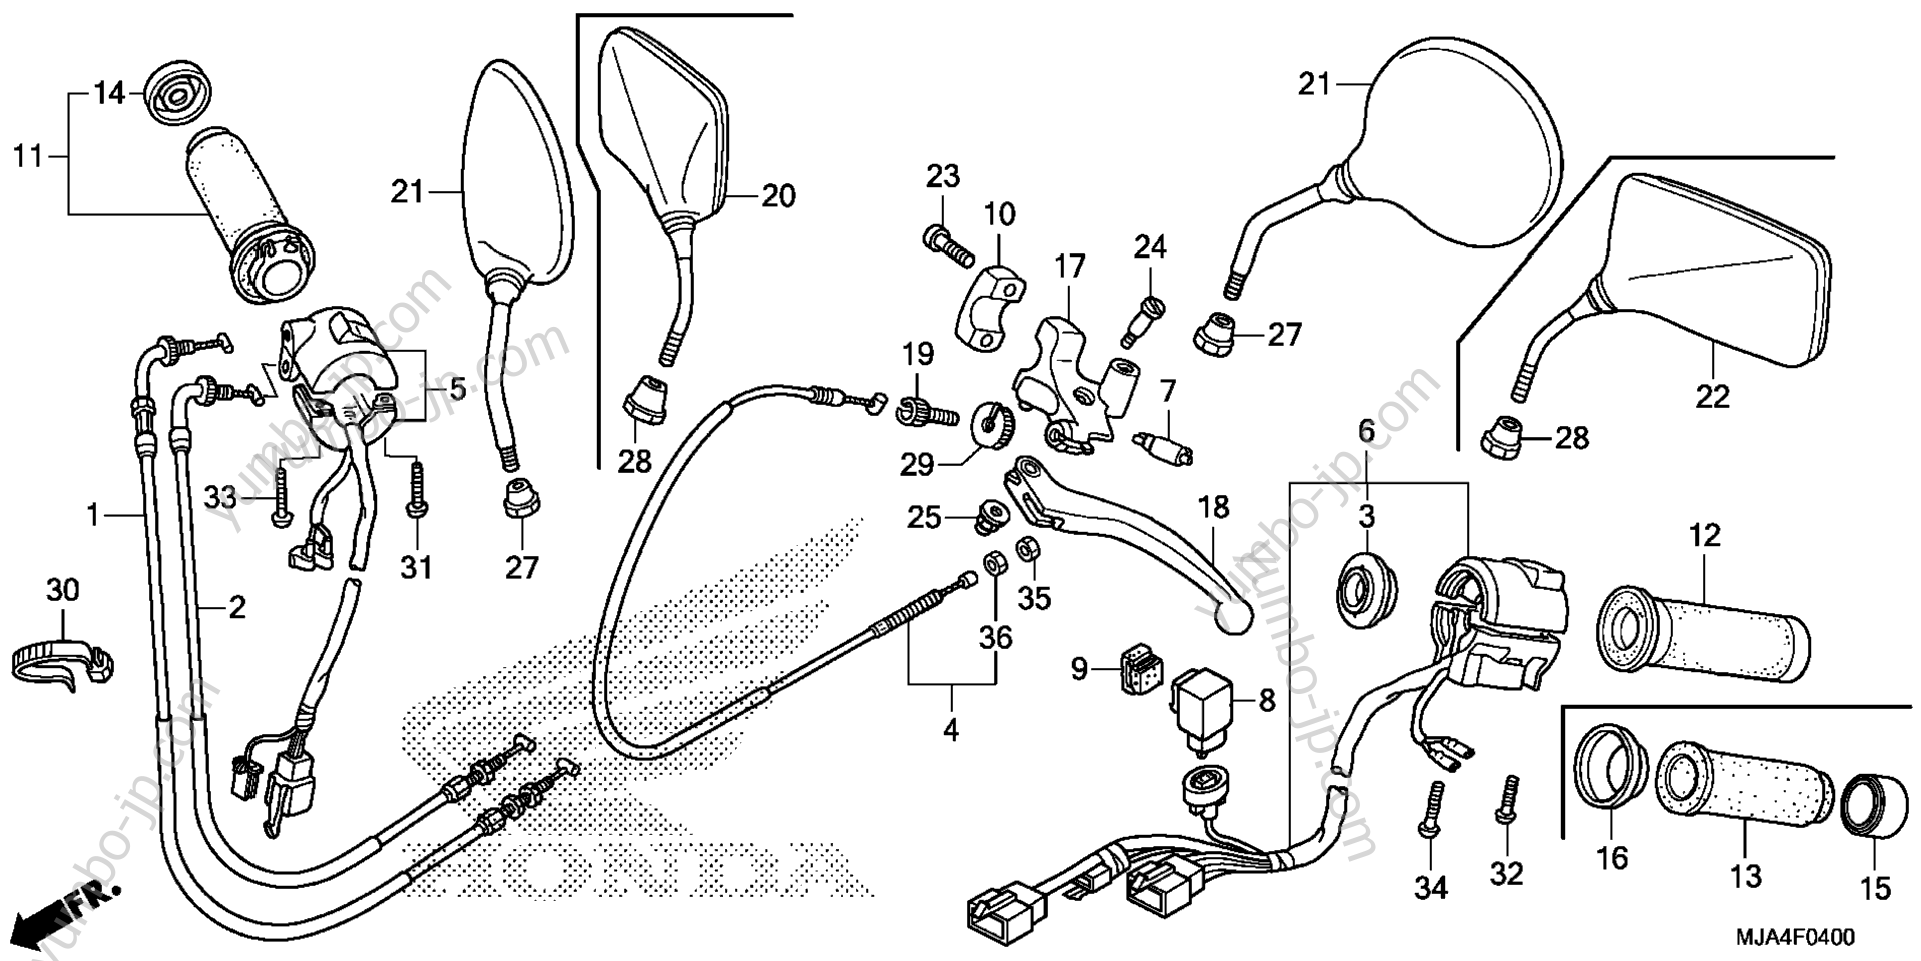 HANDLE LEVER / SWITCH / CABLE for motorcycles HONDA VT750C2B AC 2012 year